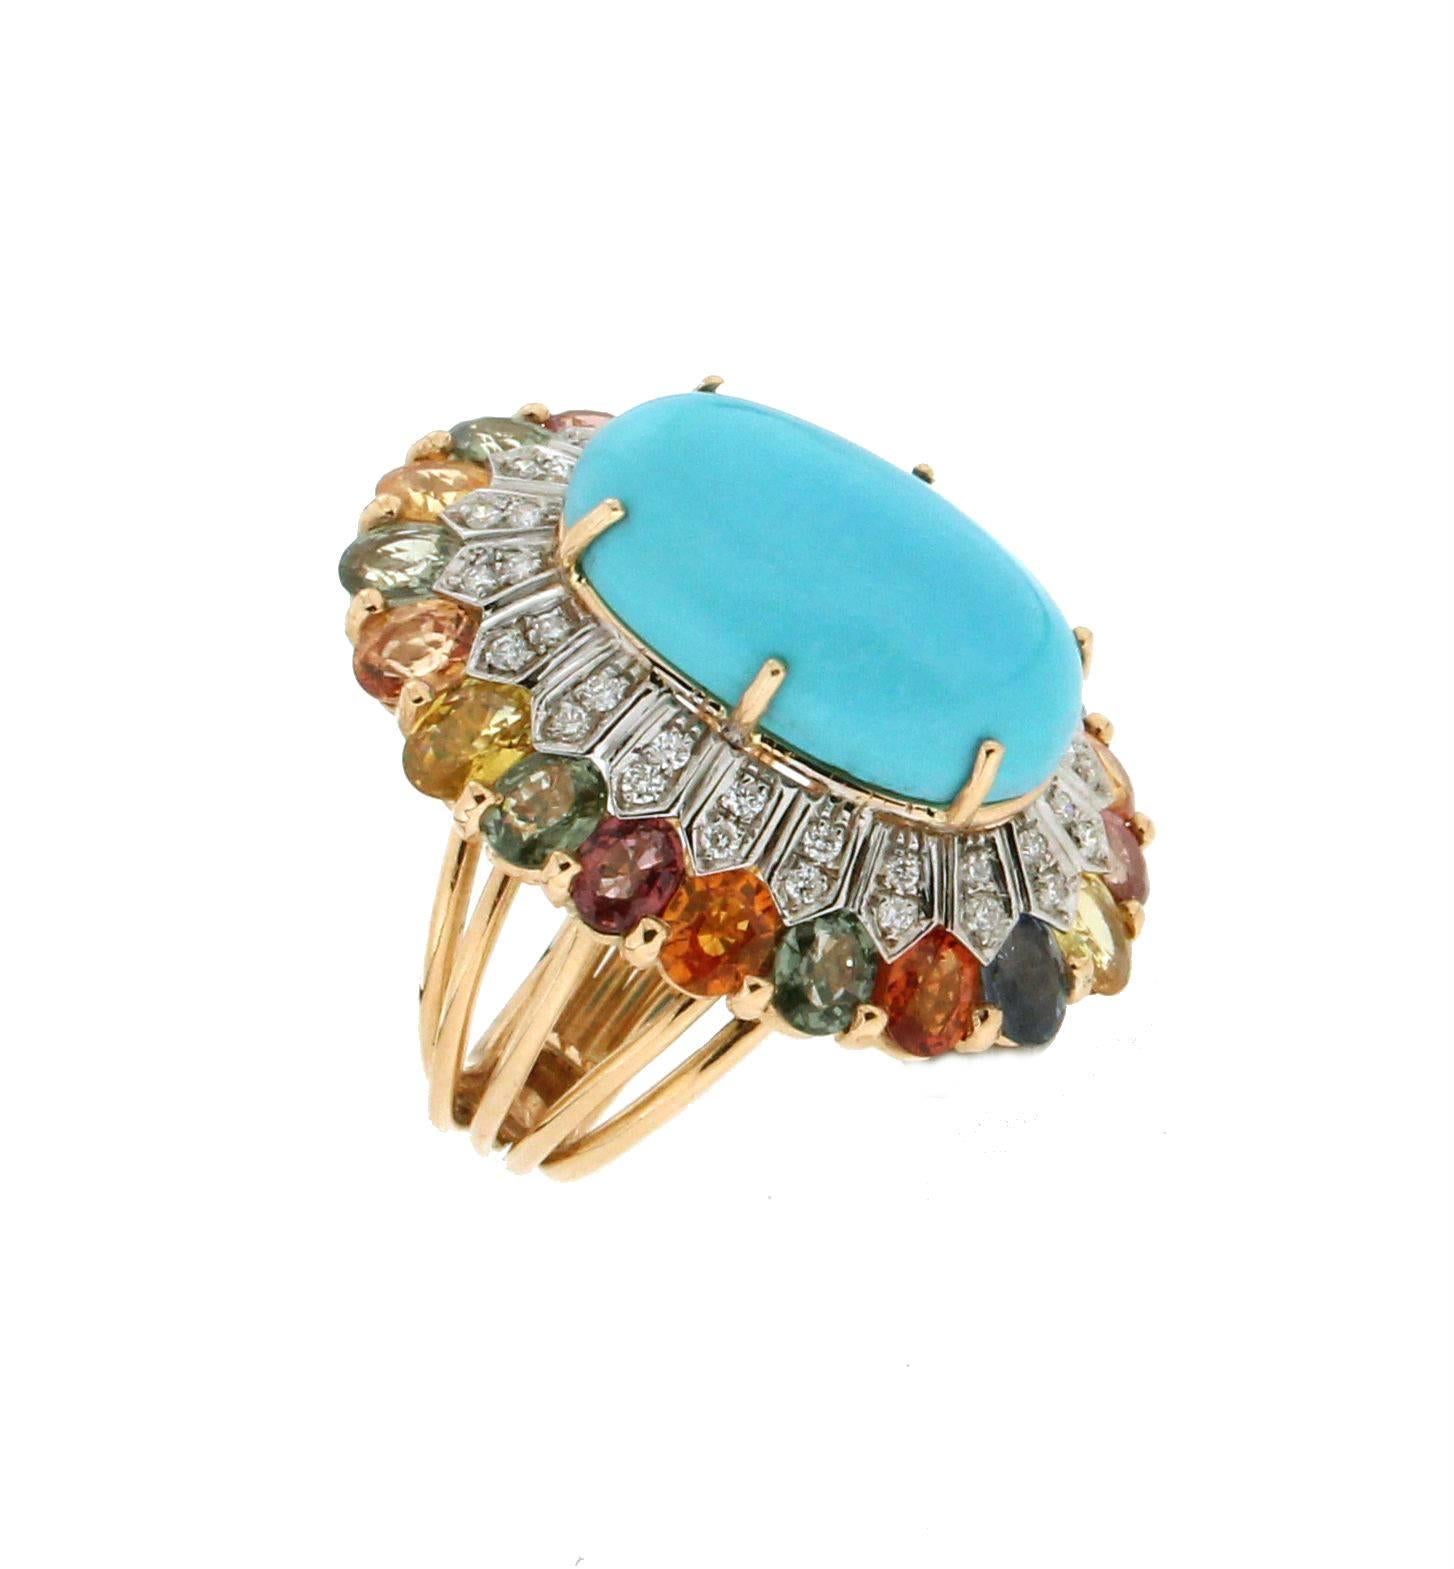 Turquoise,18 karat White and Yellow Gold,Diamonds,Sapphires,Cocktail Ring

Ring Weight 20.90 gr
Diamonds 0.52 kt
Sapphires 10.40 kt
Turquoise 3 gr
Ring Size 8 us
Diameter 1,83 cm 0,72 inch
